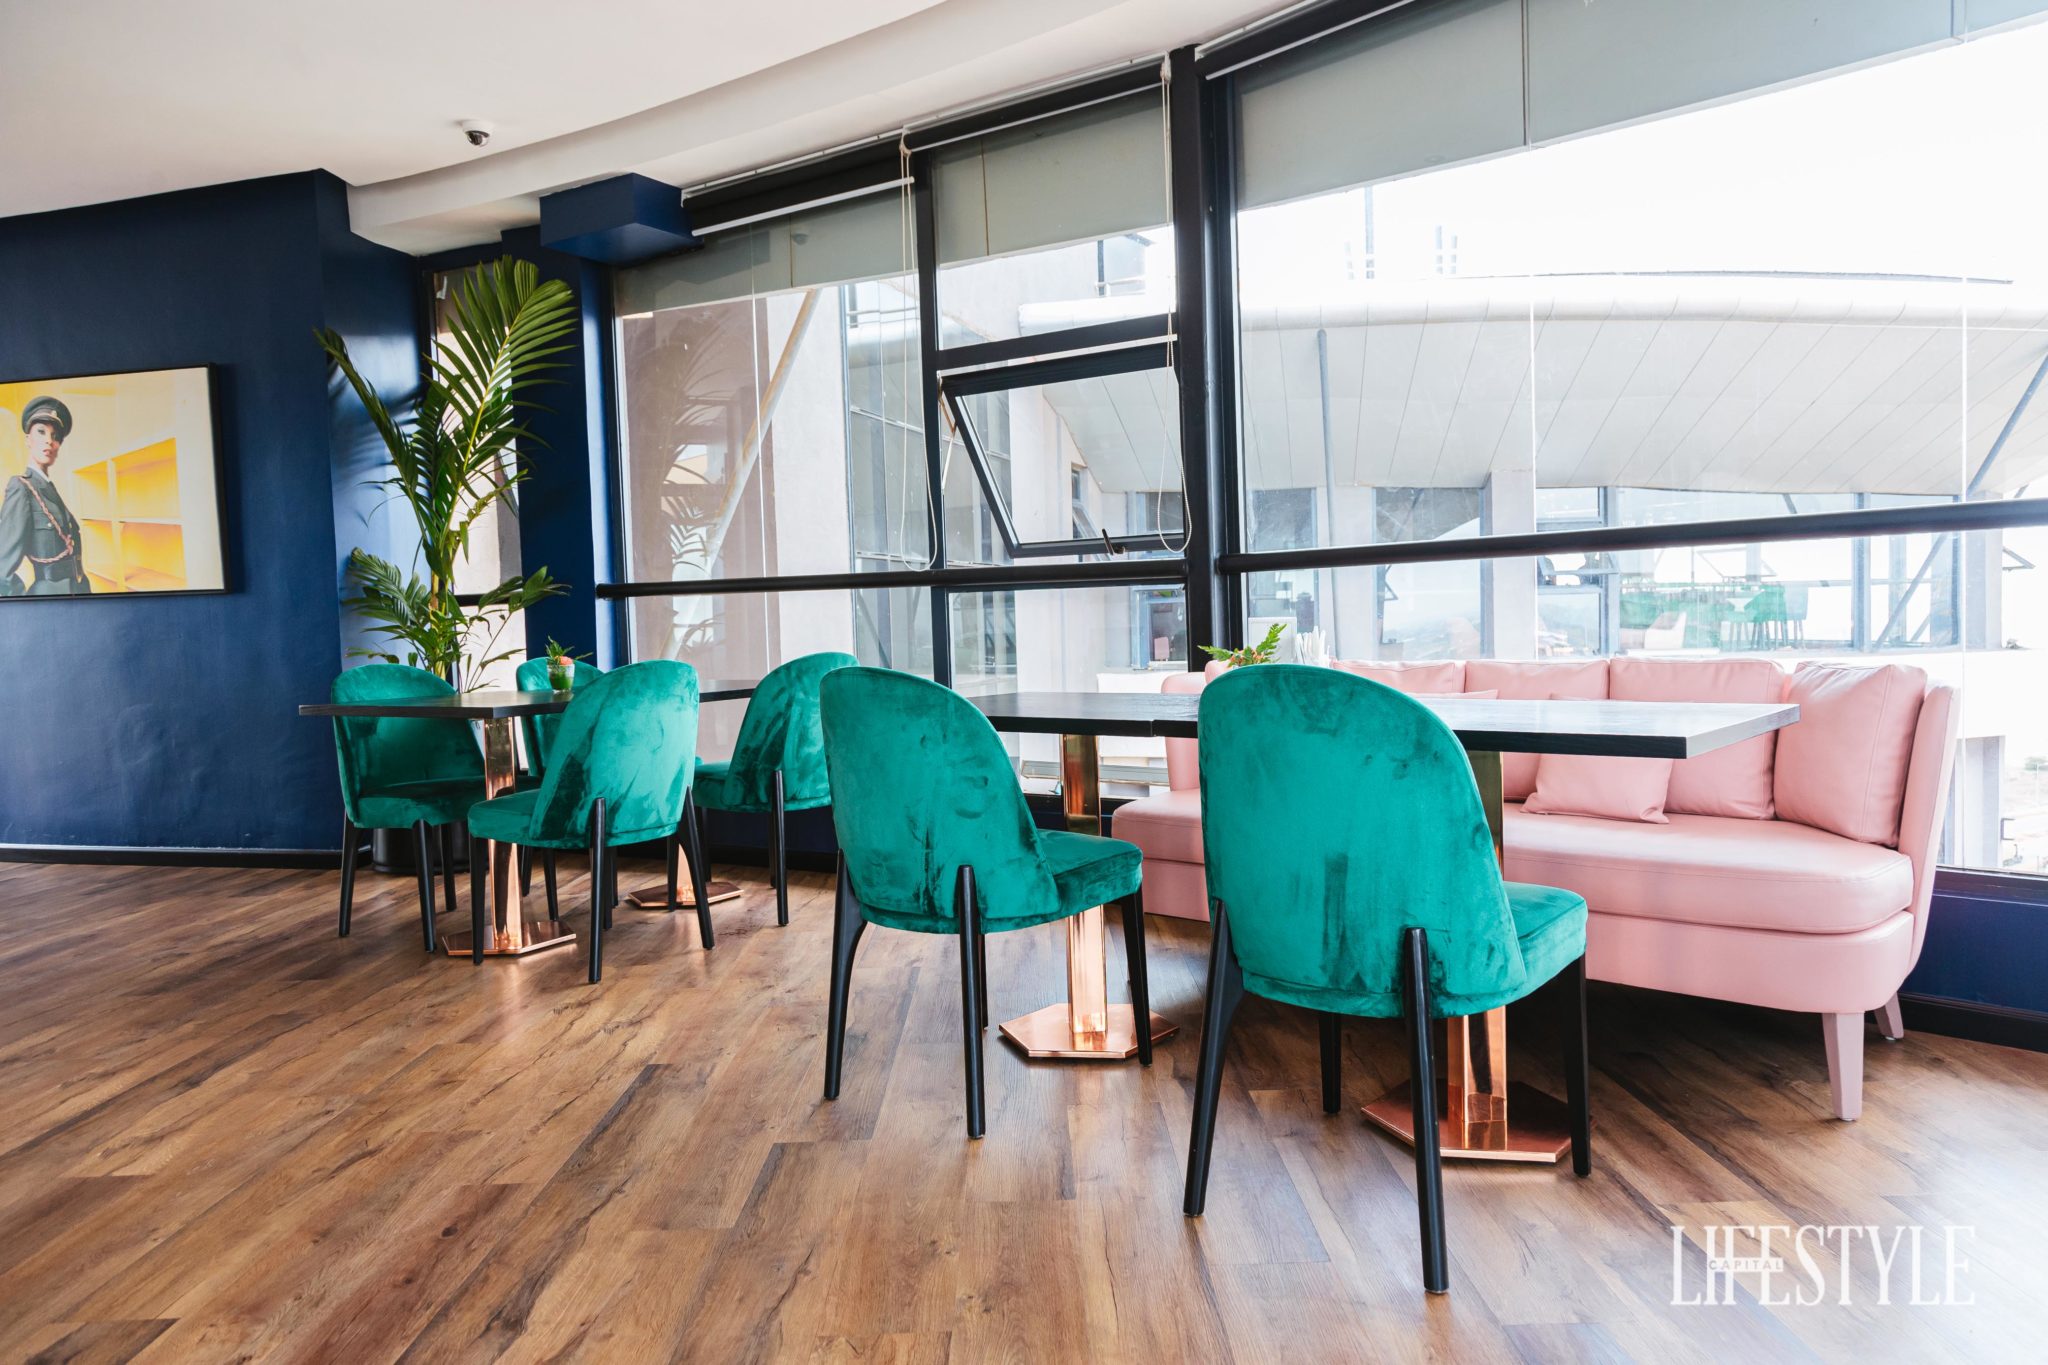 Fifteen Rooftop: curating tasty menus, prepared with passion and love